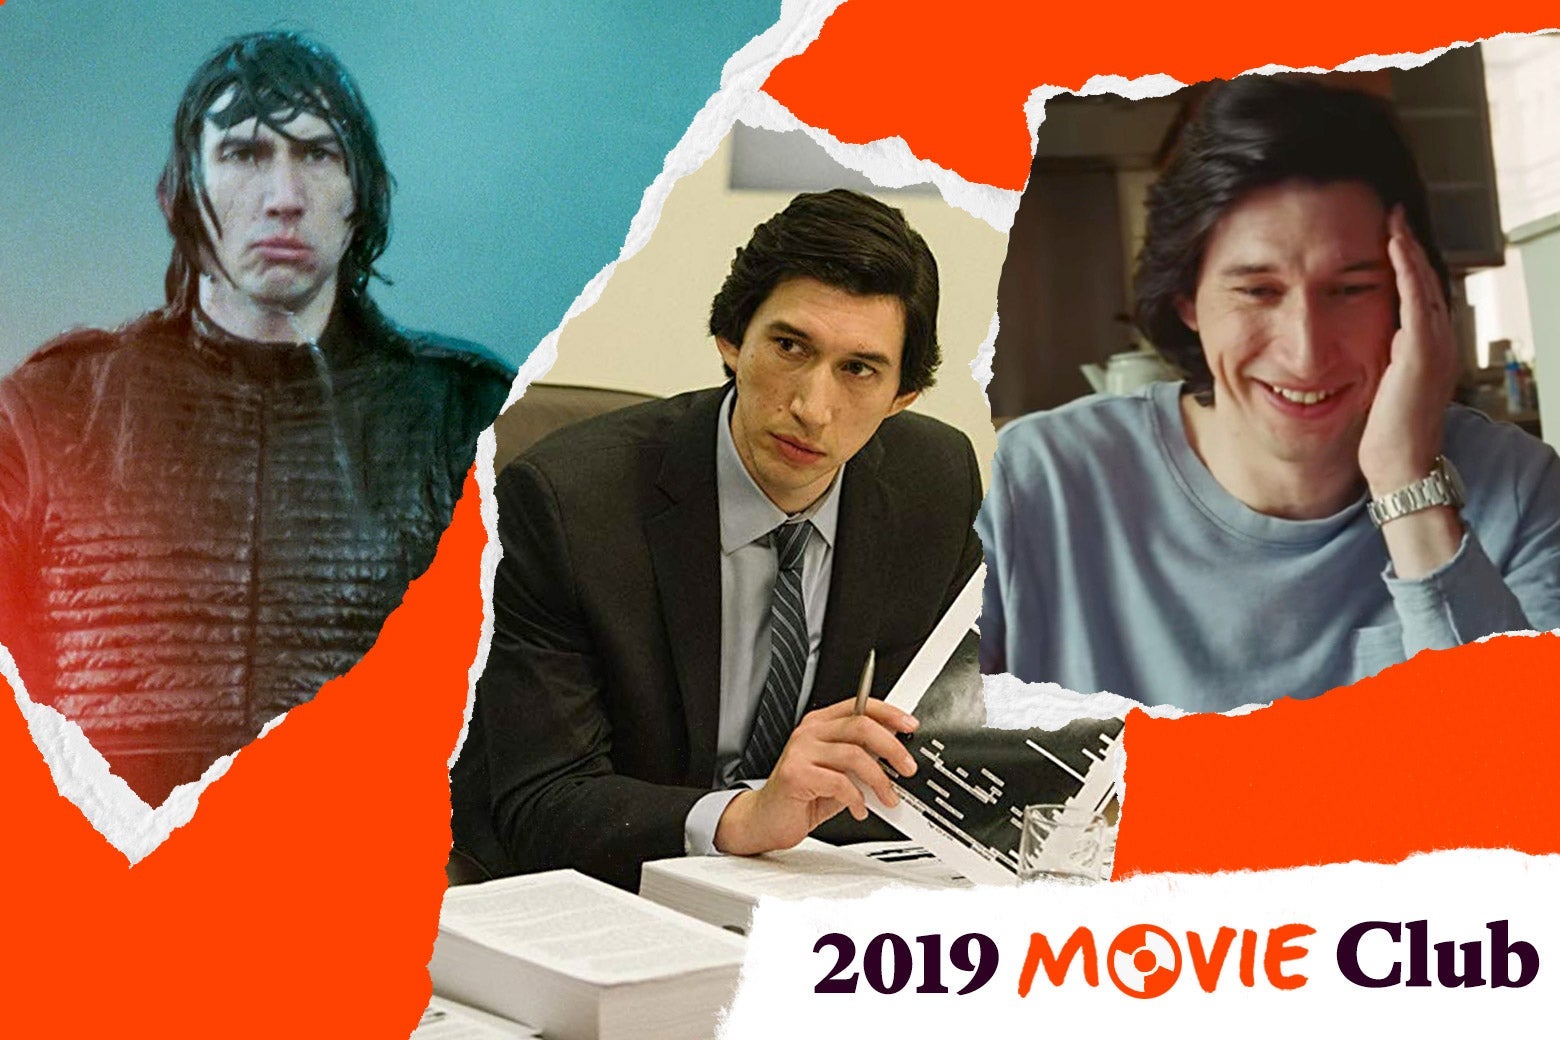 Adam Driver as Kylo Ren, in The Report, and in Marriage Story. Text in the corner says, "2019 Movie Club."